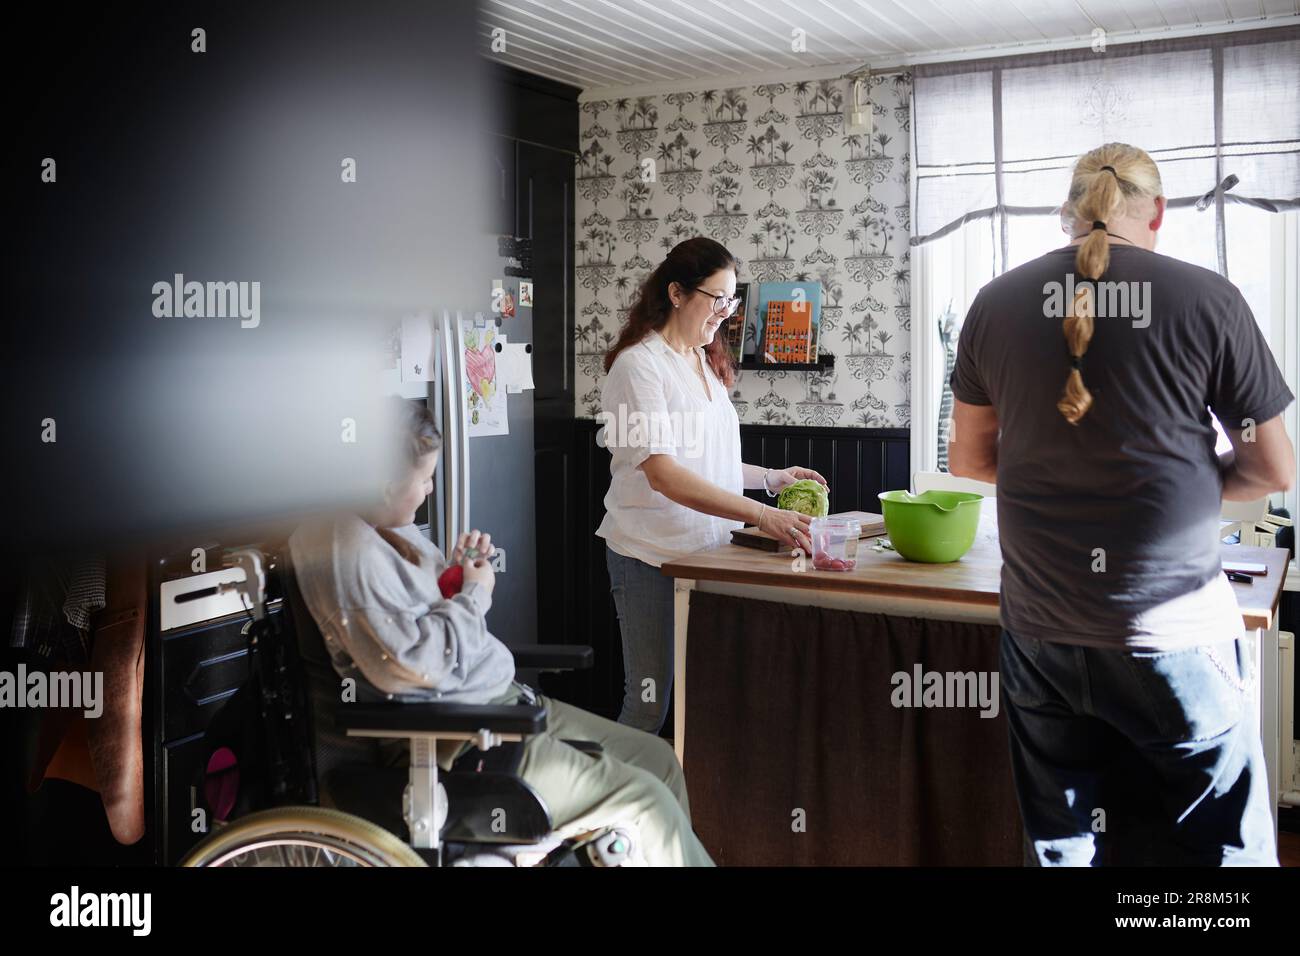 Parents with disabled daughter in wheelchair preparing food in kitchen Stock Photo